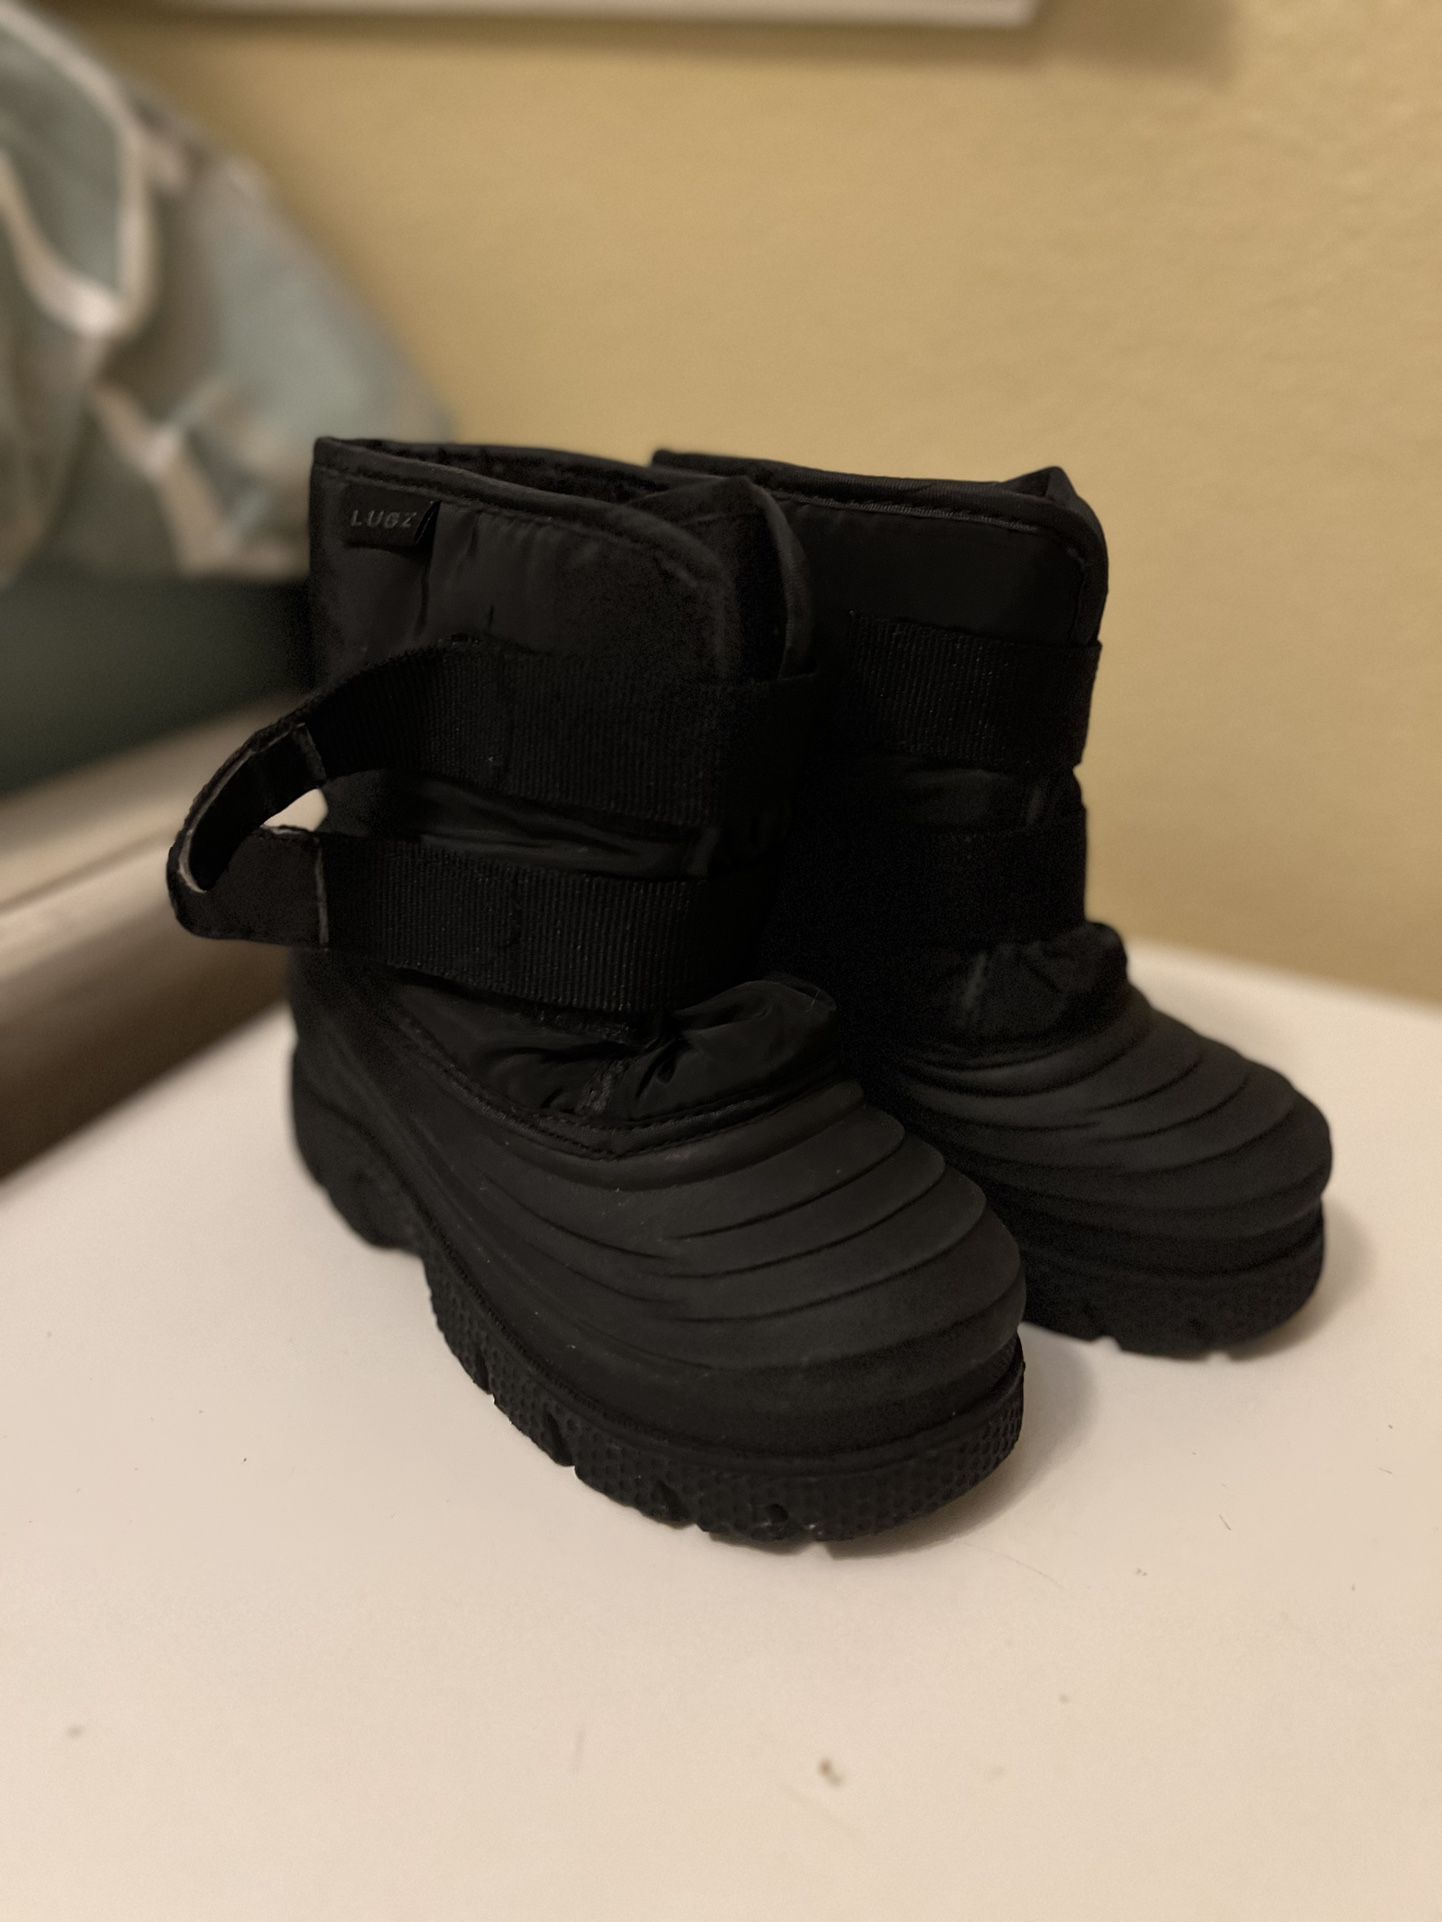 Kids/Toddler Snow Boots Size 10